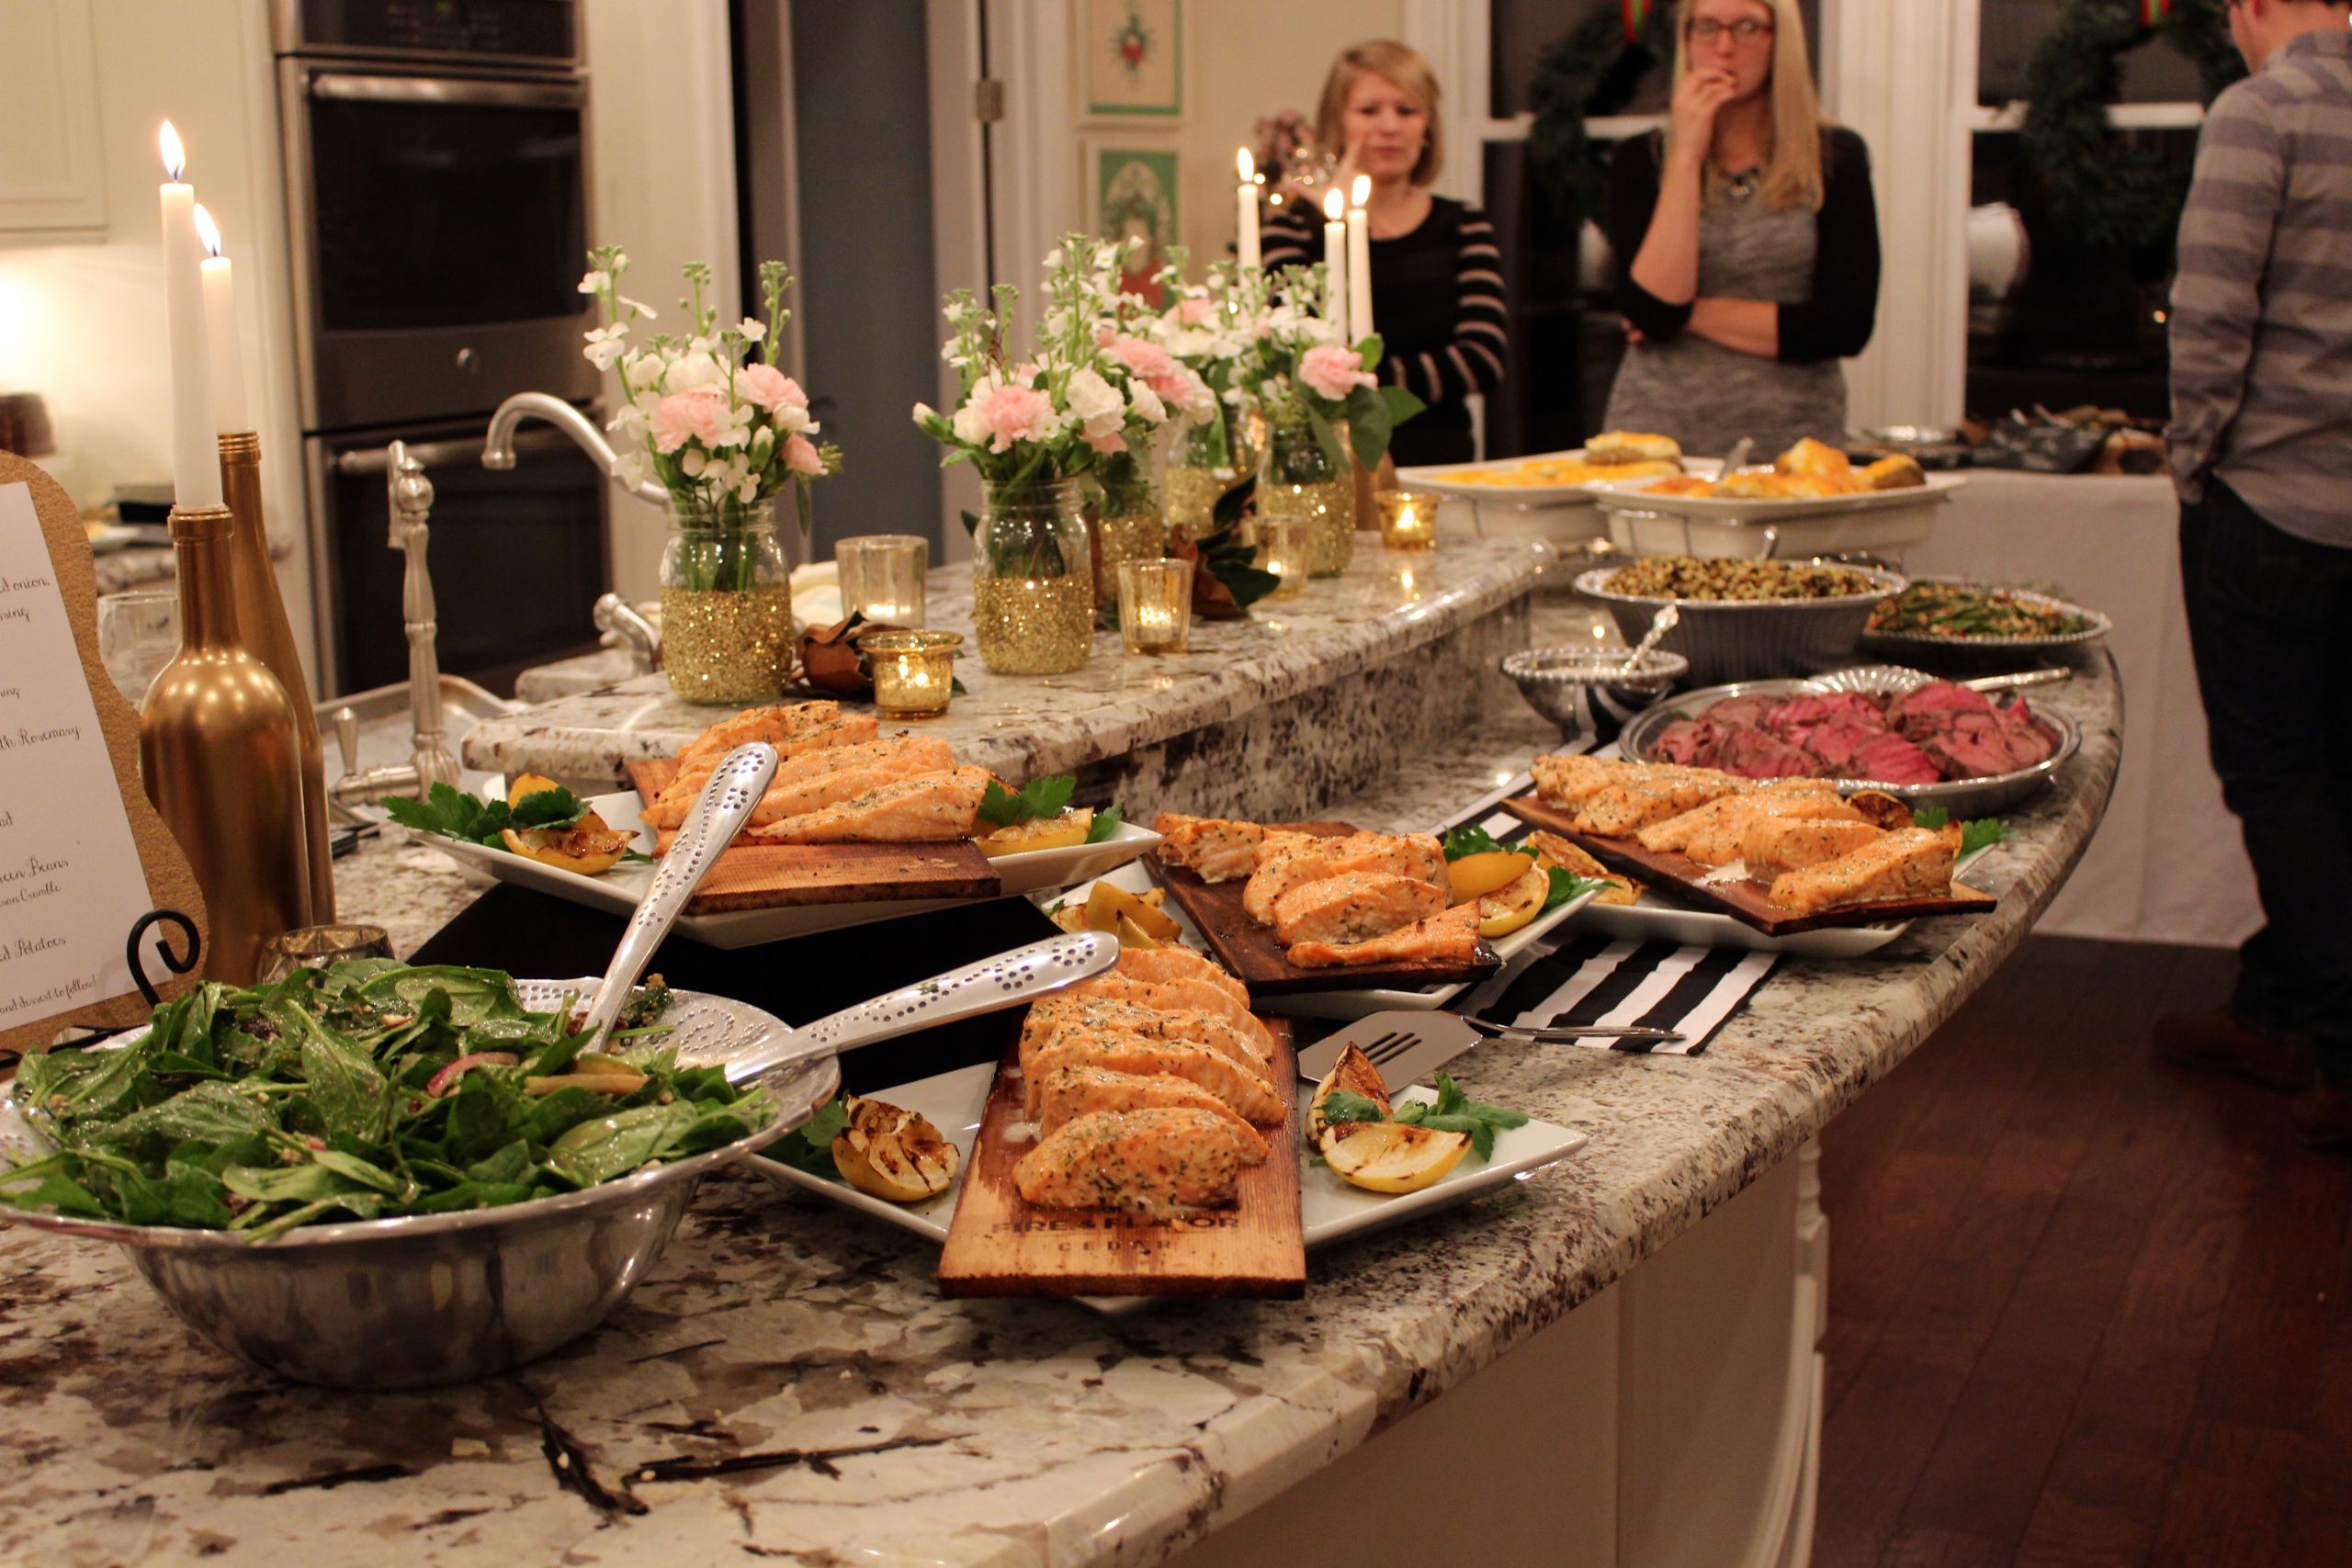 Best Dinner Party Ideas
 The top 24 Ideas About Dinner Ideas for Dinner Party